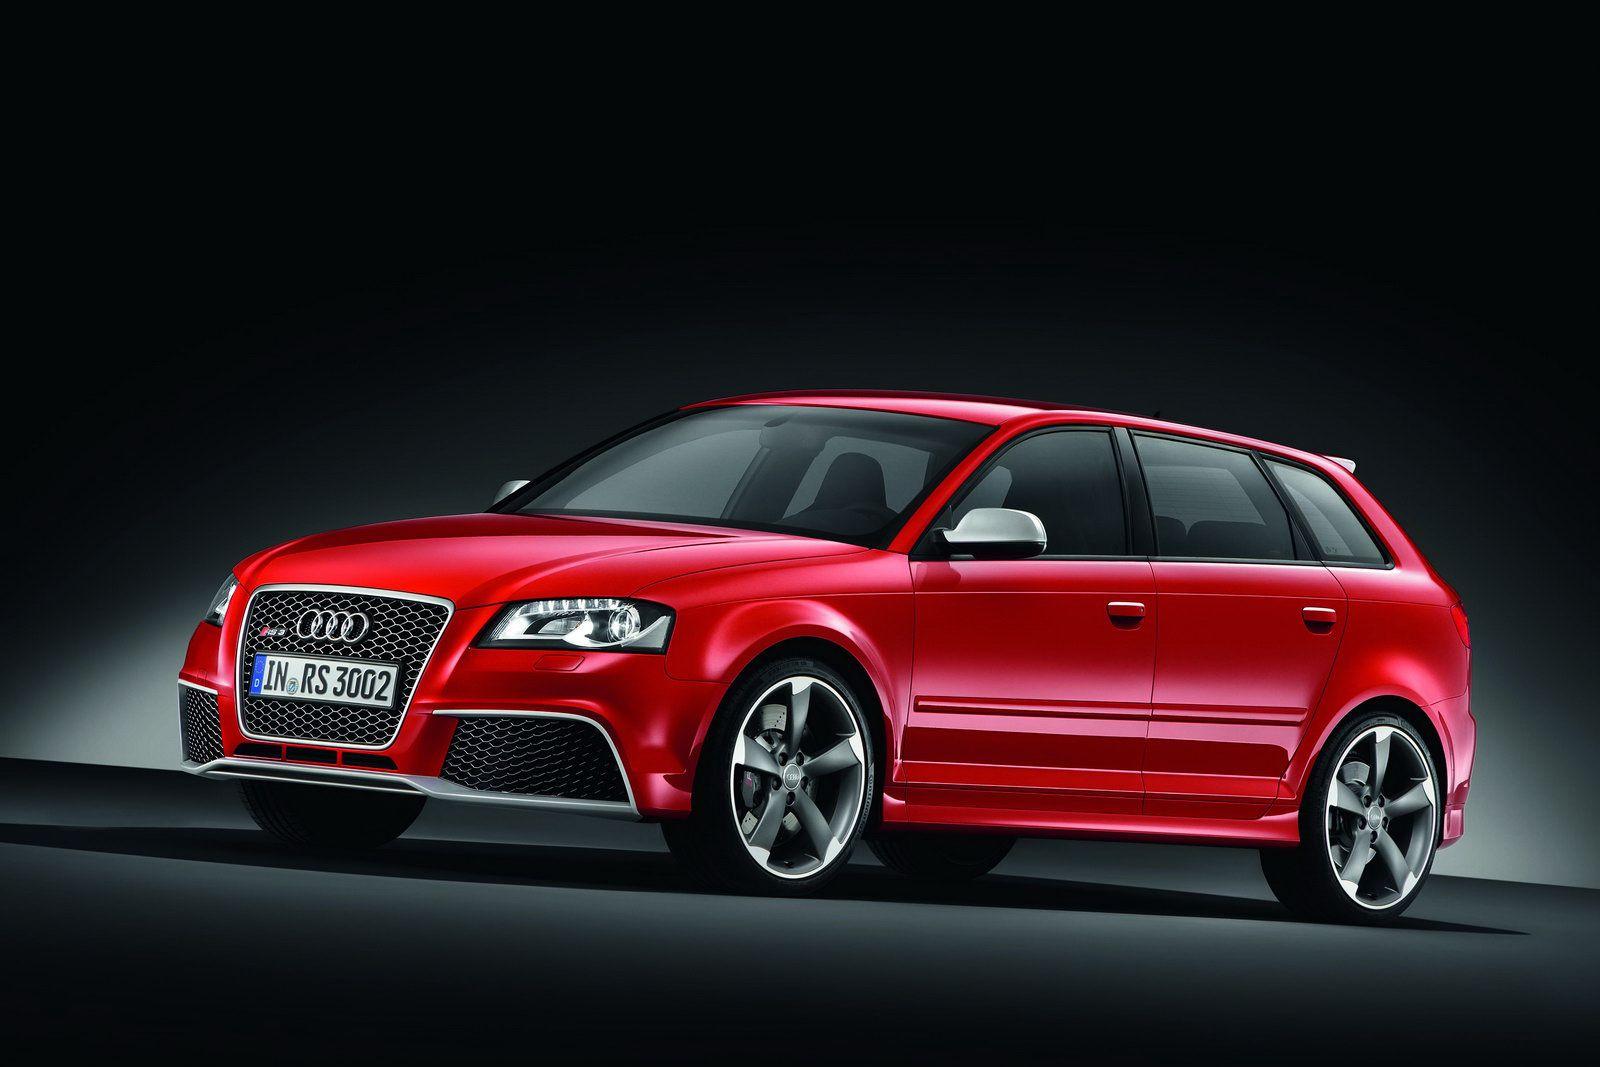 Audi RS Sportback With HP Turbocharged Five